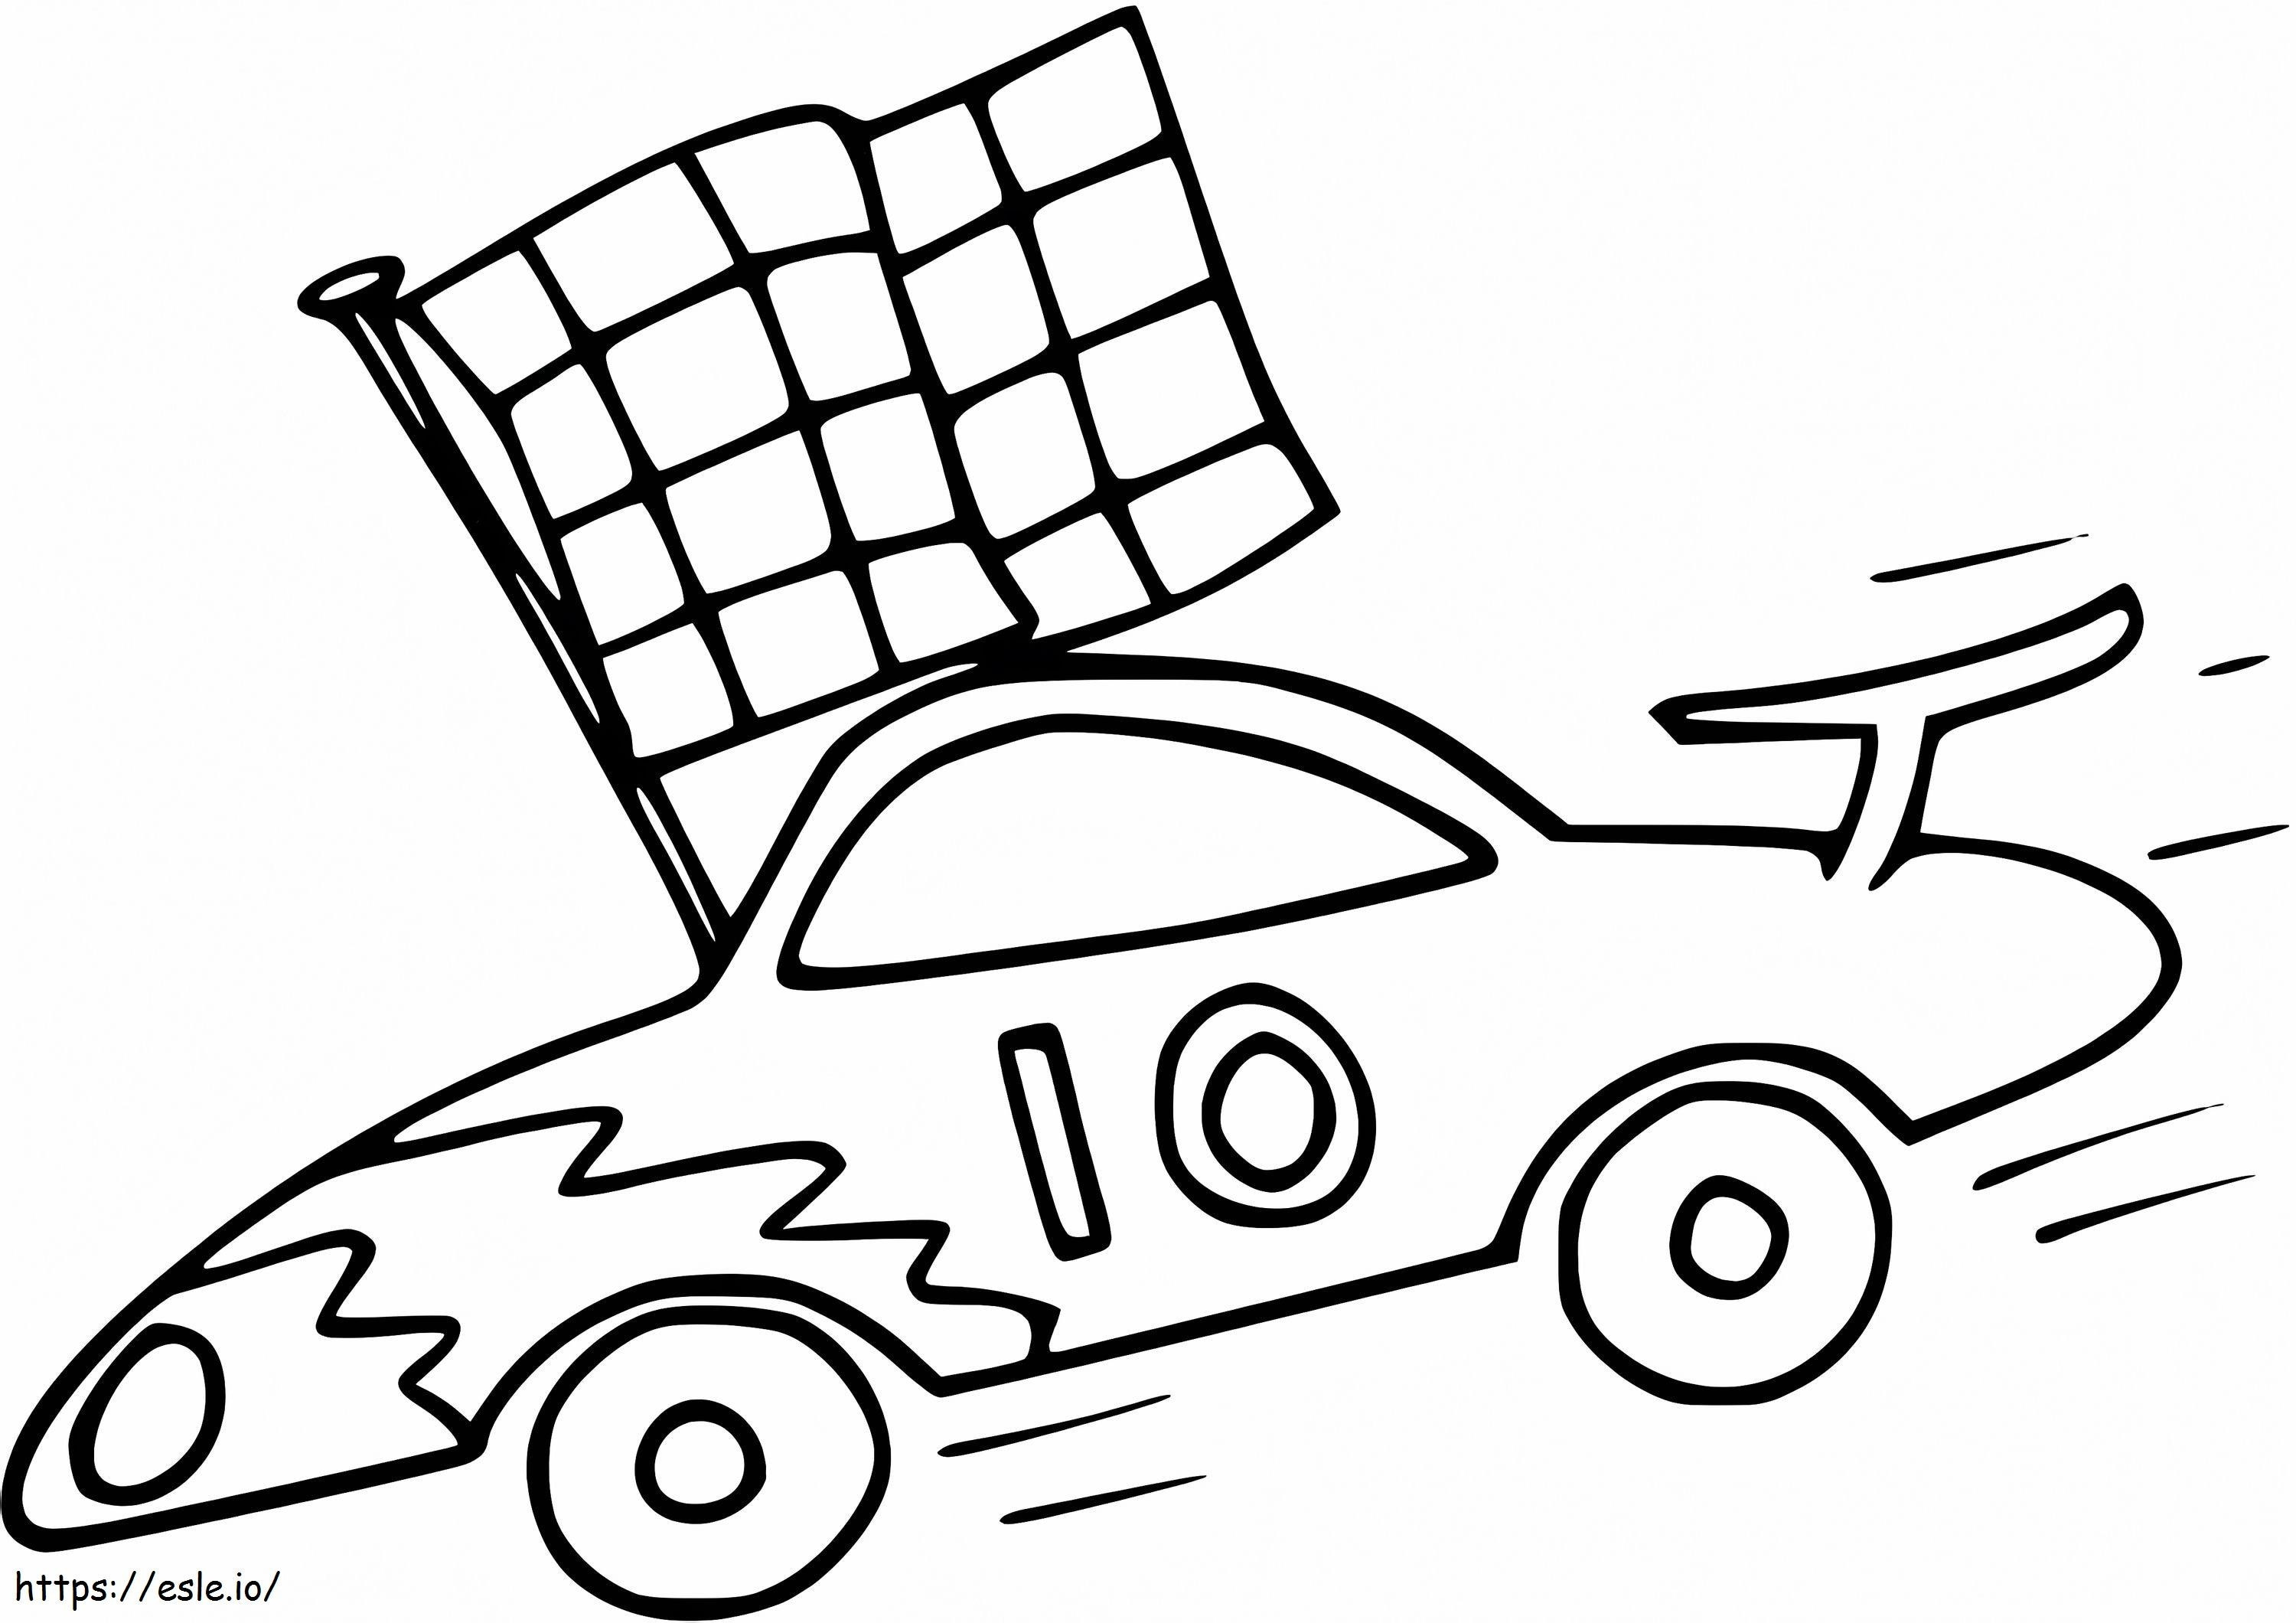 Cute Race Car coloring page